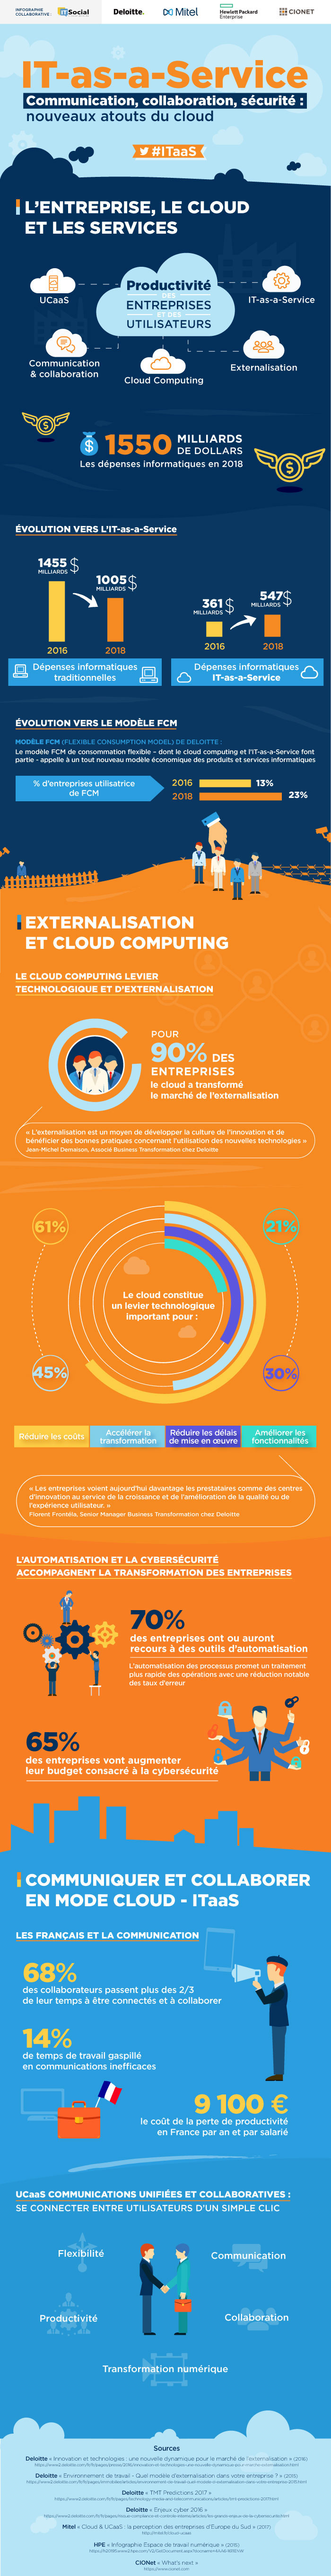 ITSOCIAL_MITEL_HPE_infographie